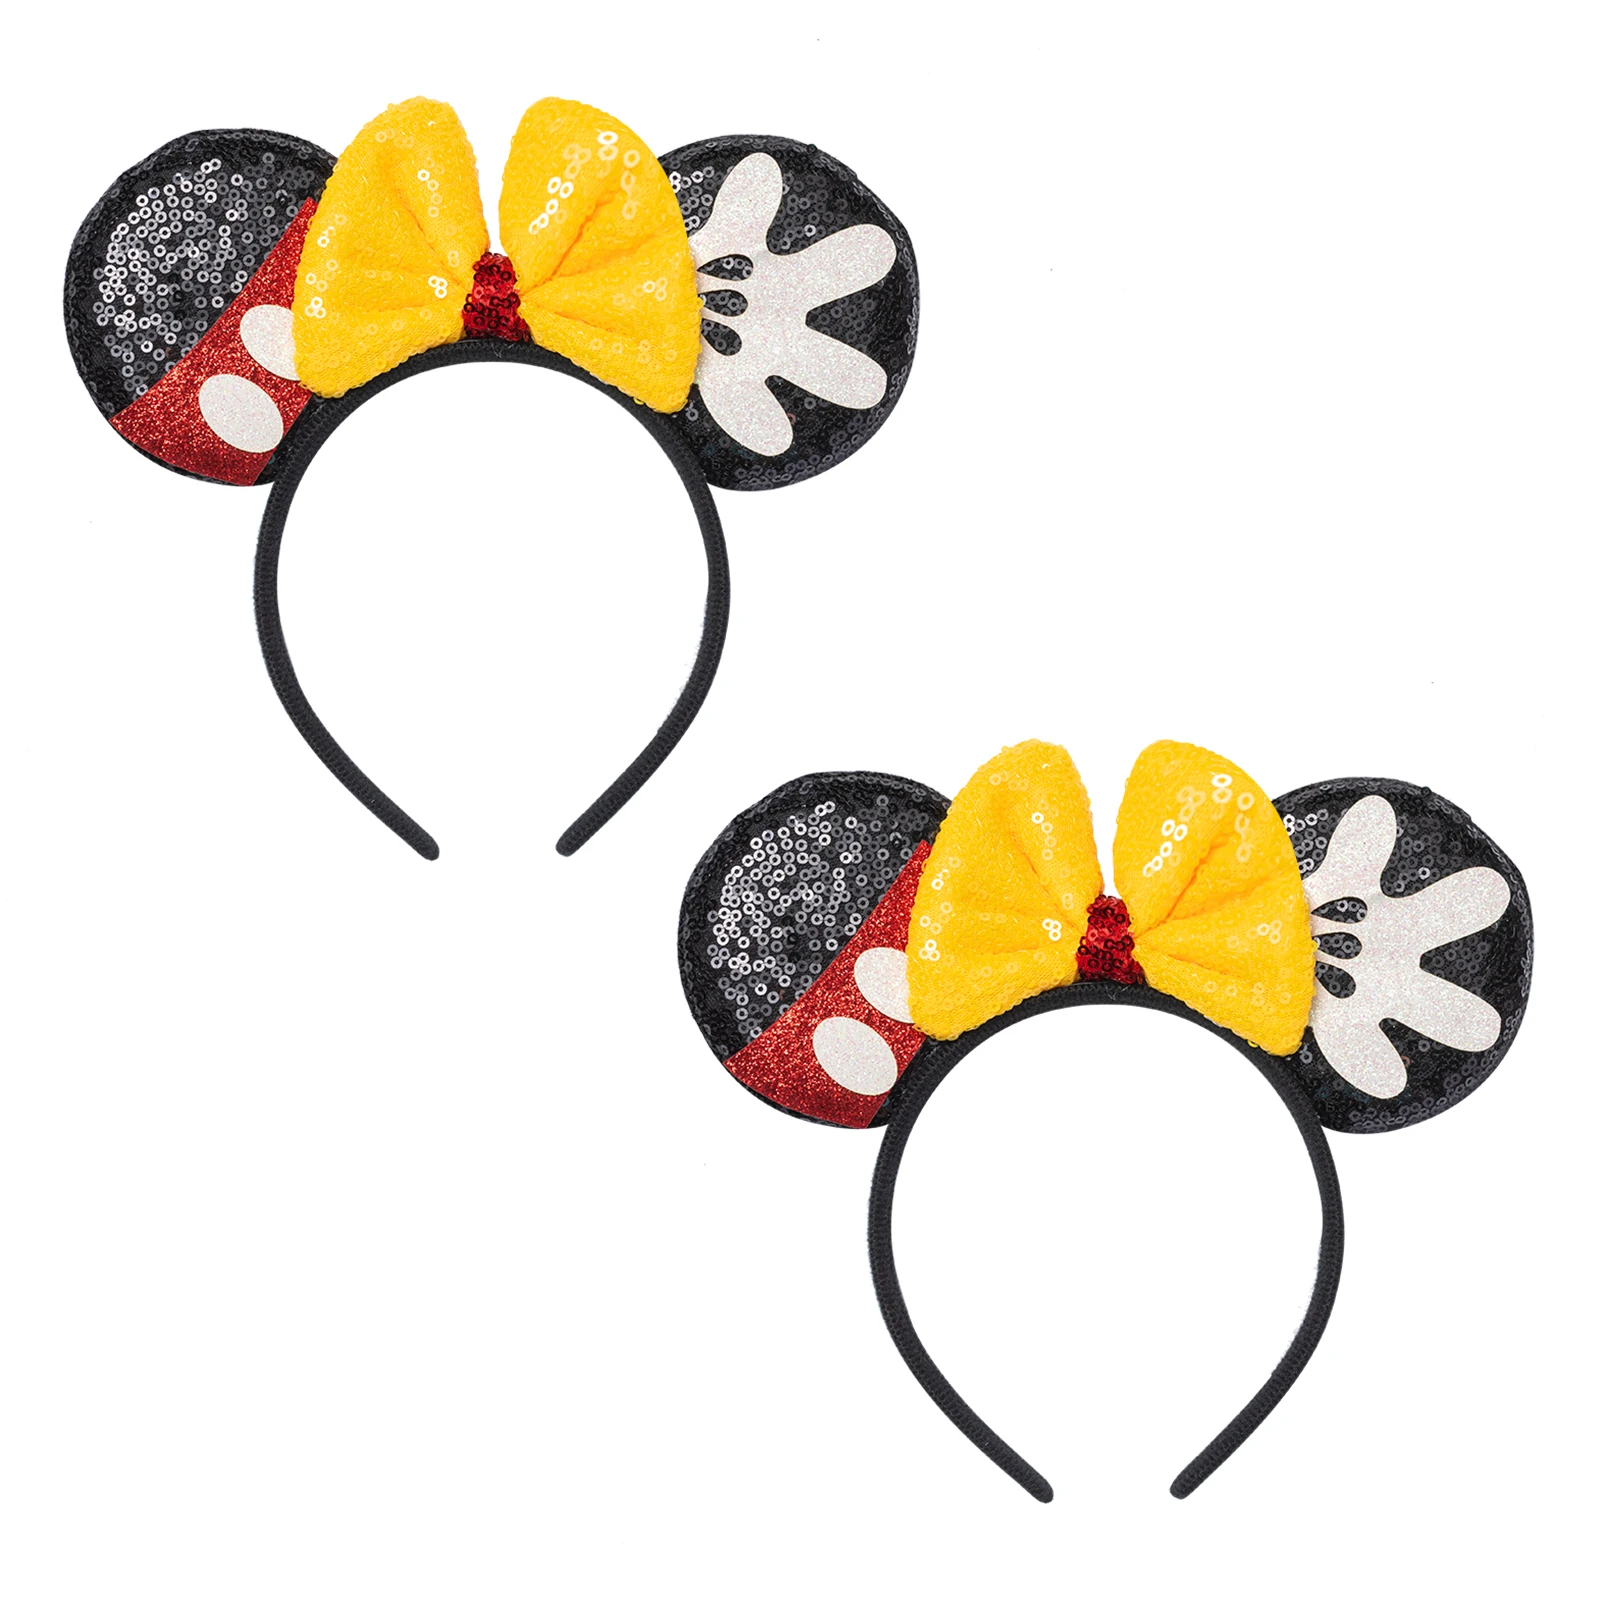 

2 Pcs Mouse Ears Headbands,Shiny Bows Mouse Ears Headbands for Birthday Parties, Themed Events, A Perfect Addition to Your Trip